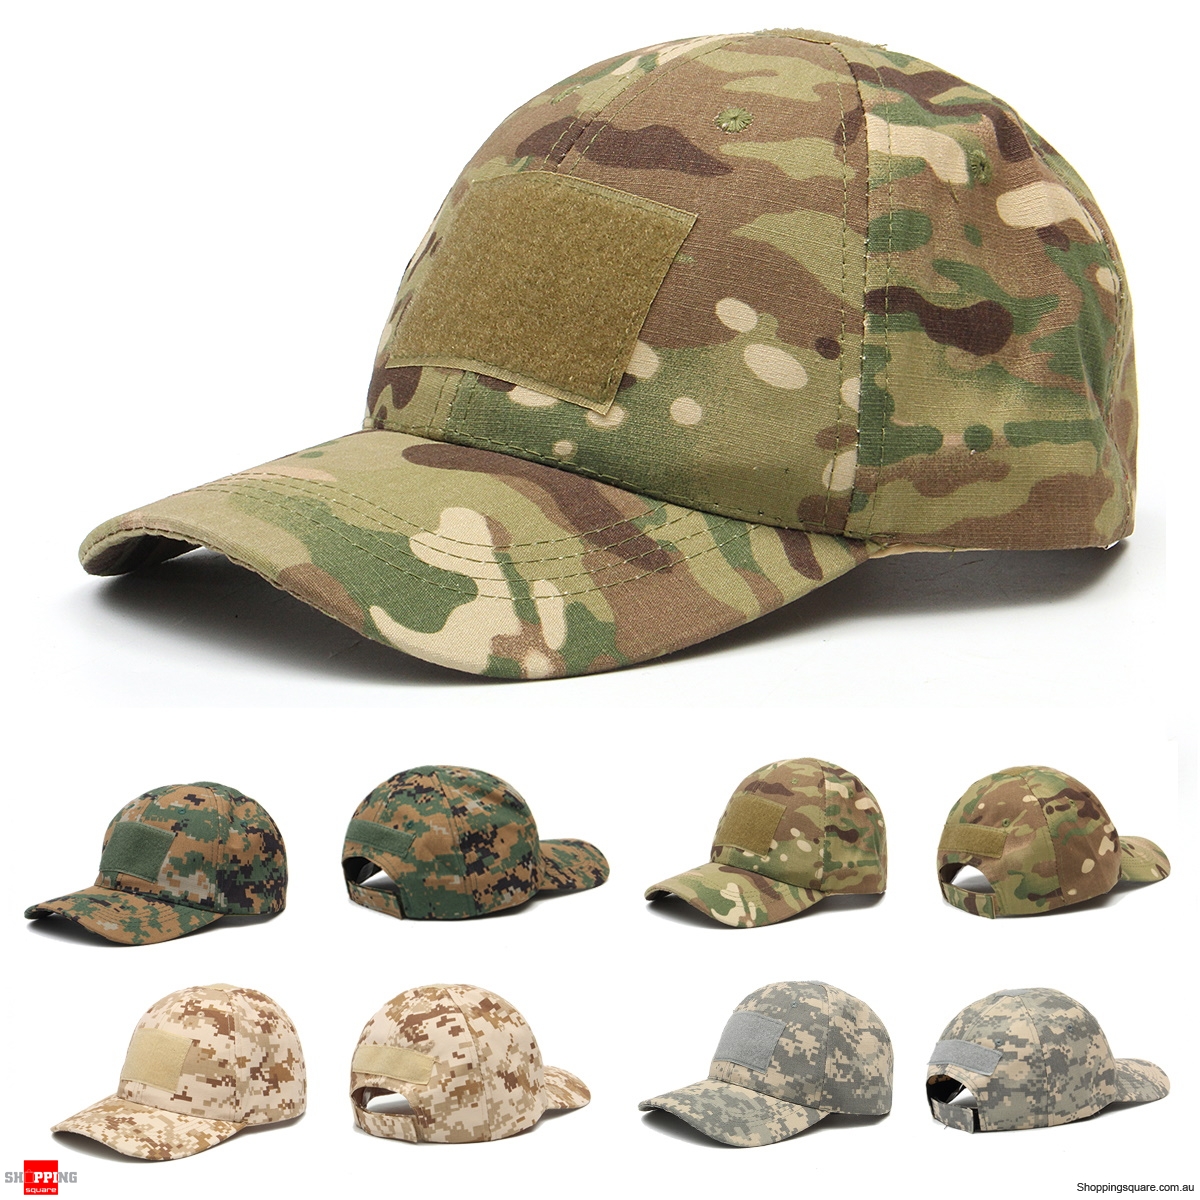 Adjustable Camping Tactical Camouflage Travel Sunscreen Baseball Cap - CP